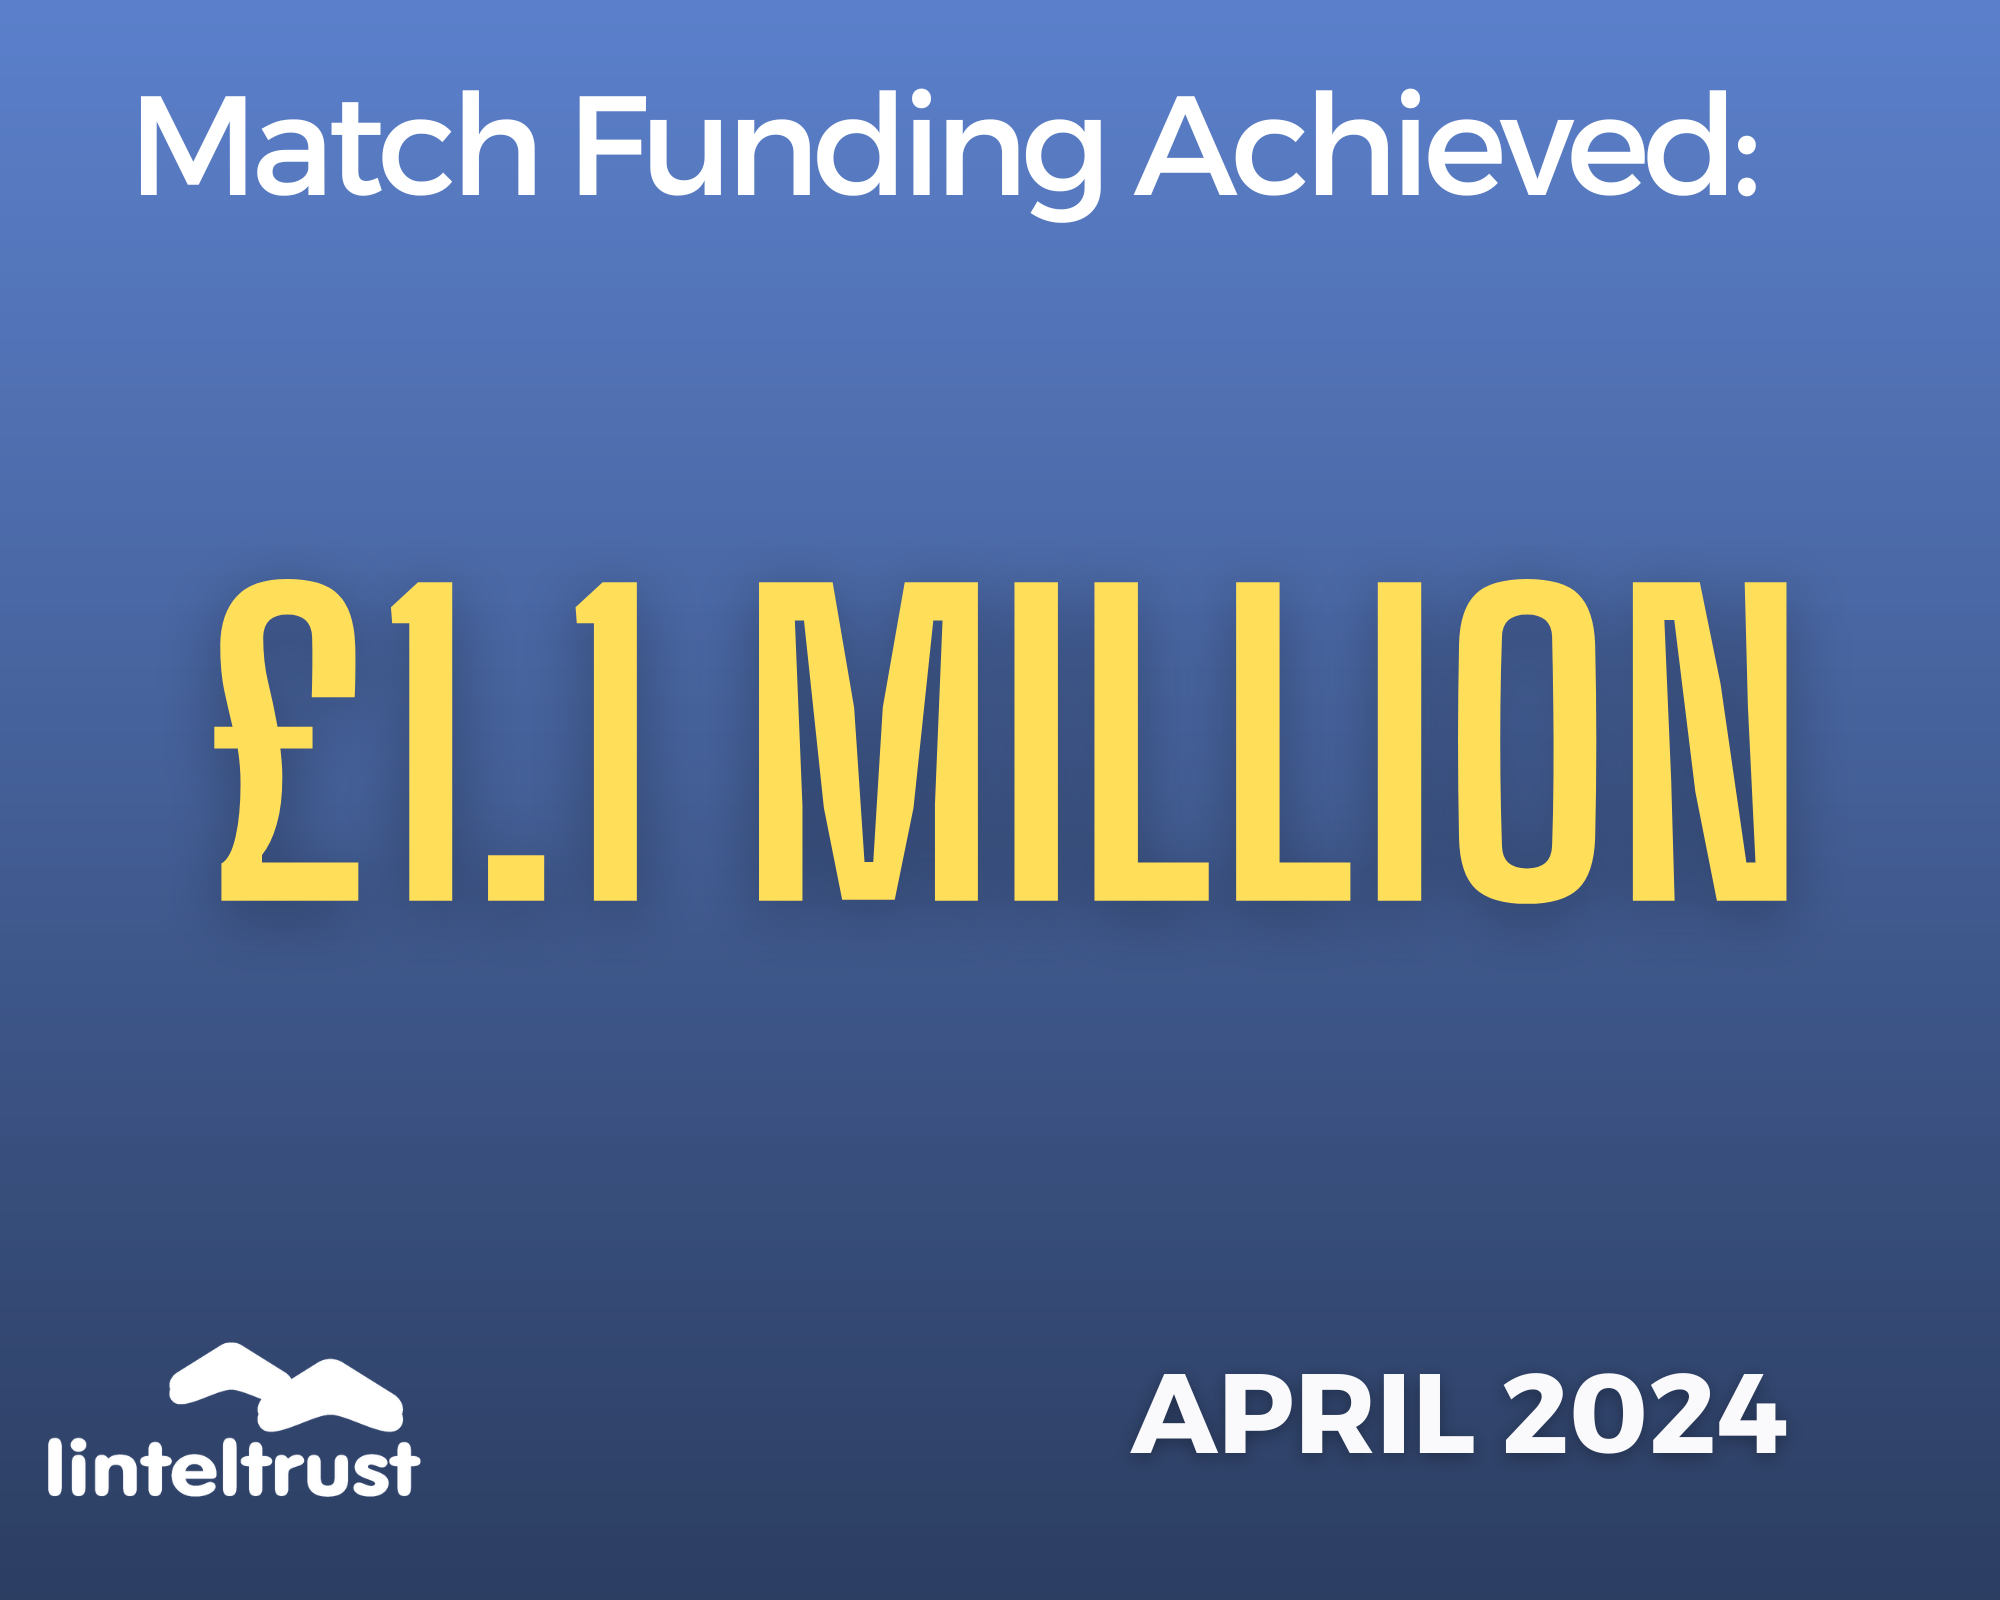 total matchfunding 24